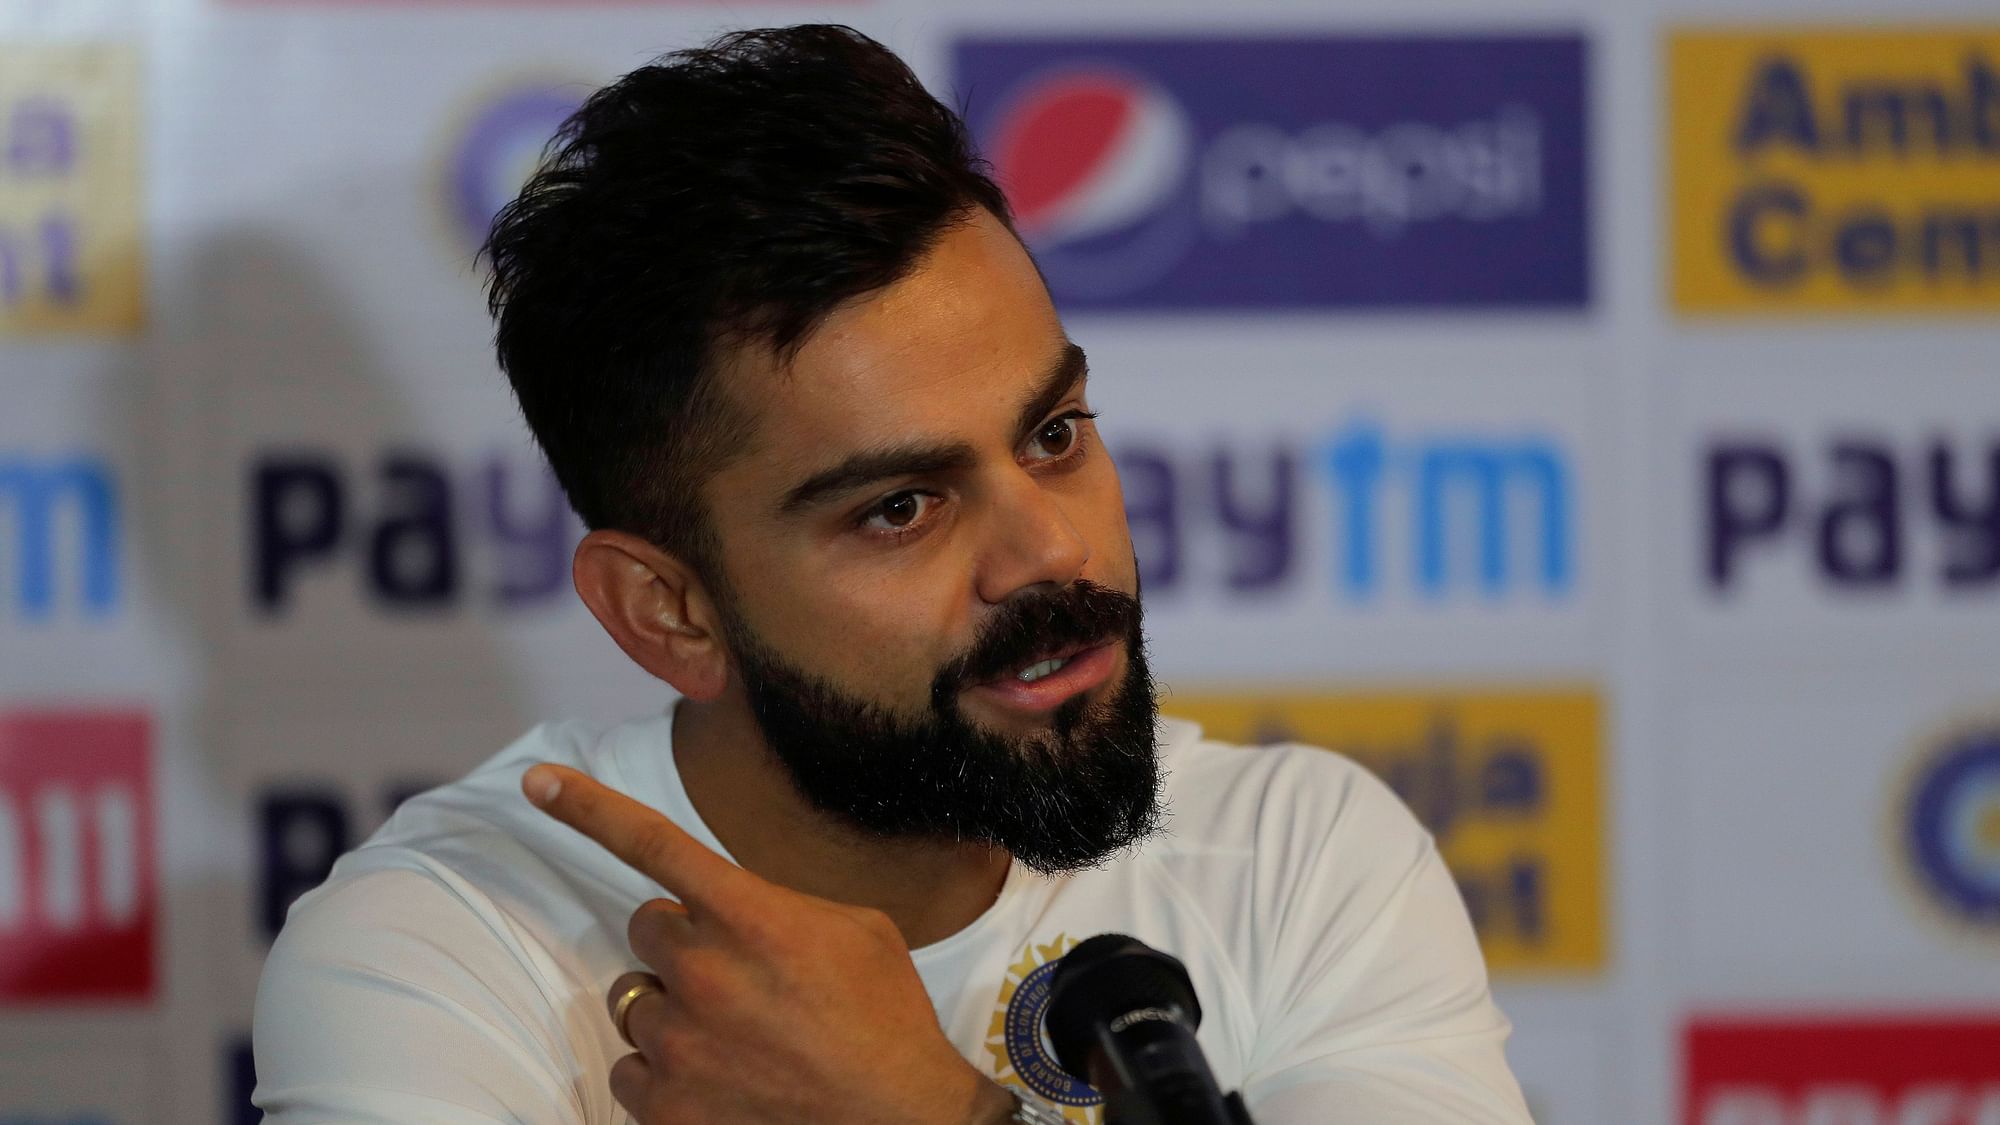 India captain Virat Kohli has proposed that points for an away victory in the World Test Championship should be doubled.